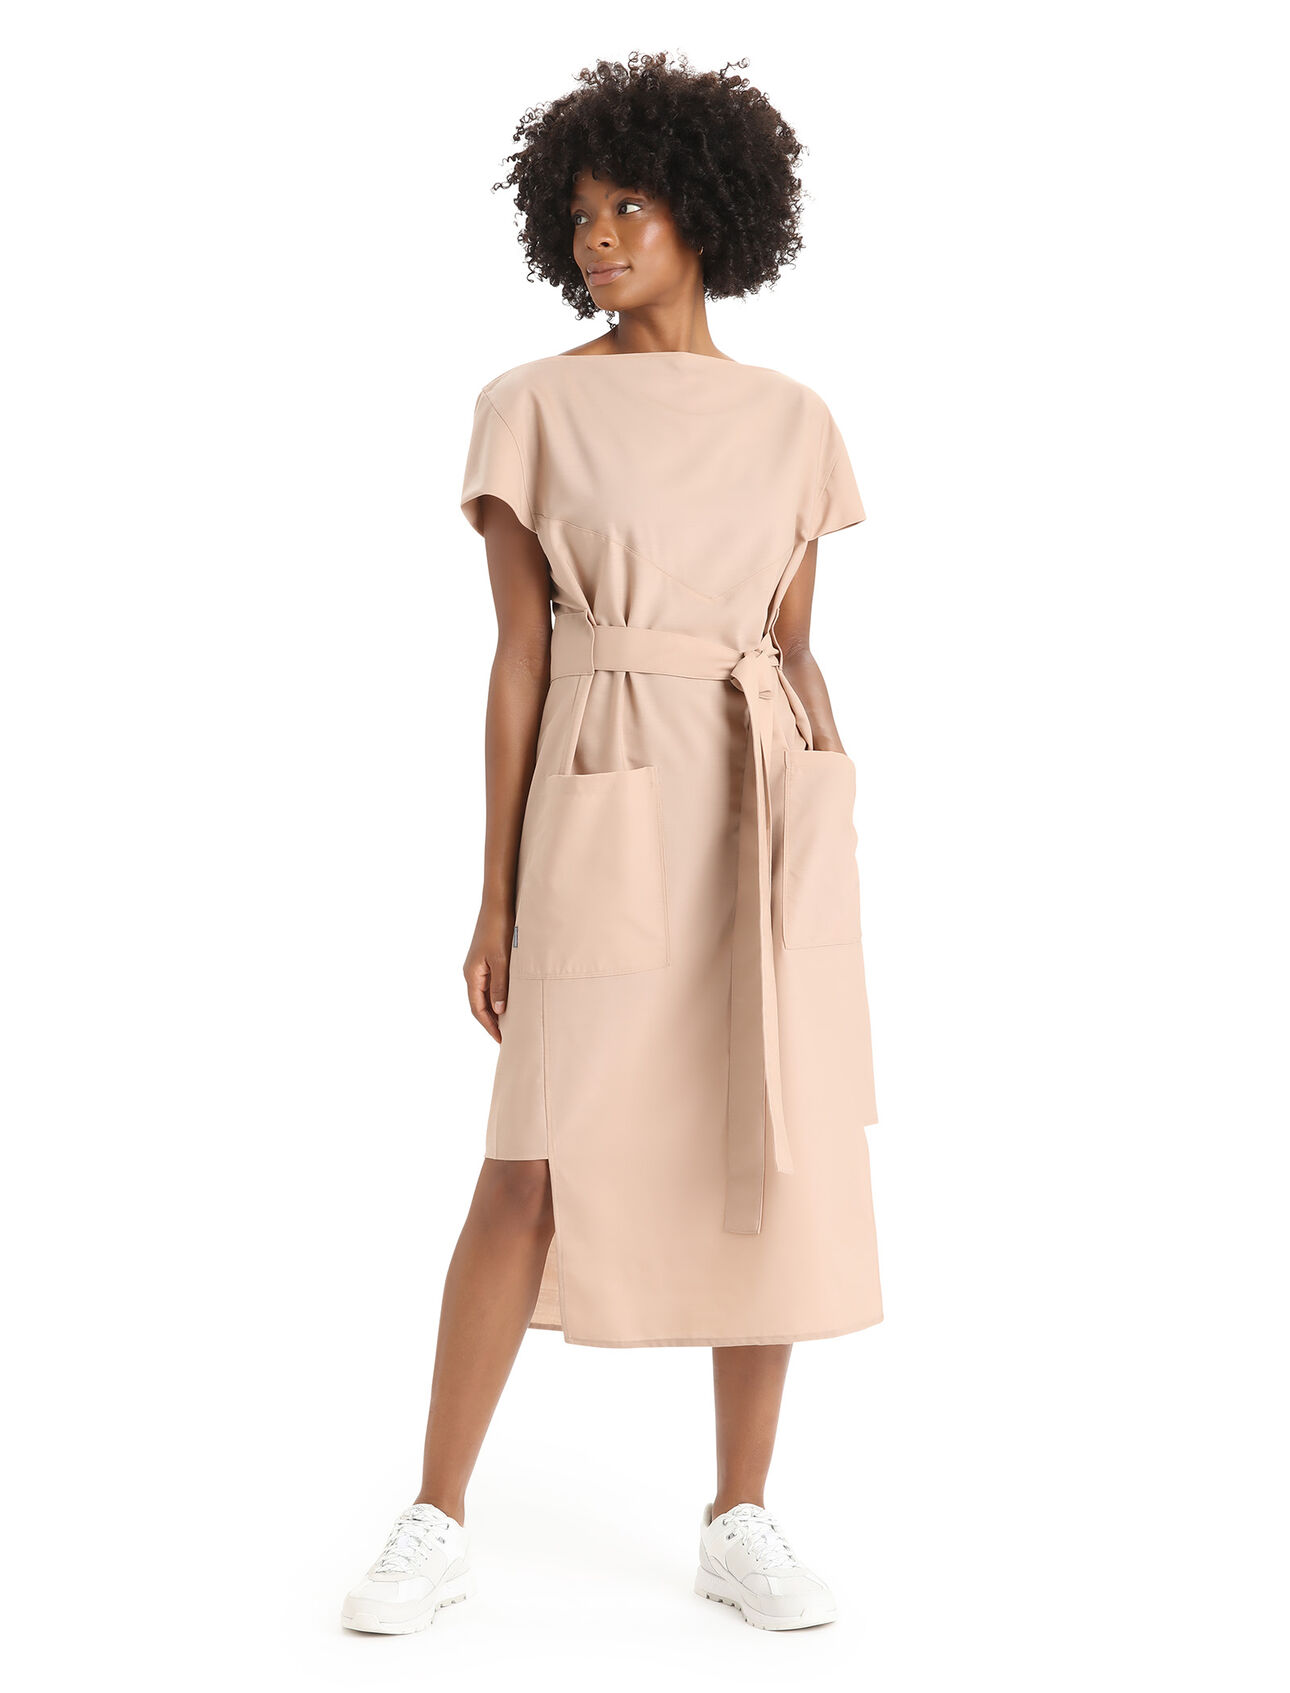 Womens Merino Natural Cut Dress Designed in partnership with Dr. Michelle Dickinson (a.k.a. Nanogirl), the Natural Cut Dress is a light, airy and ultra-comfortable merino wool dress that explores new ways to have less impact on the planet while living in style and comfort.